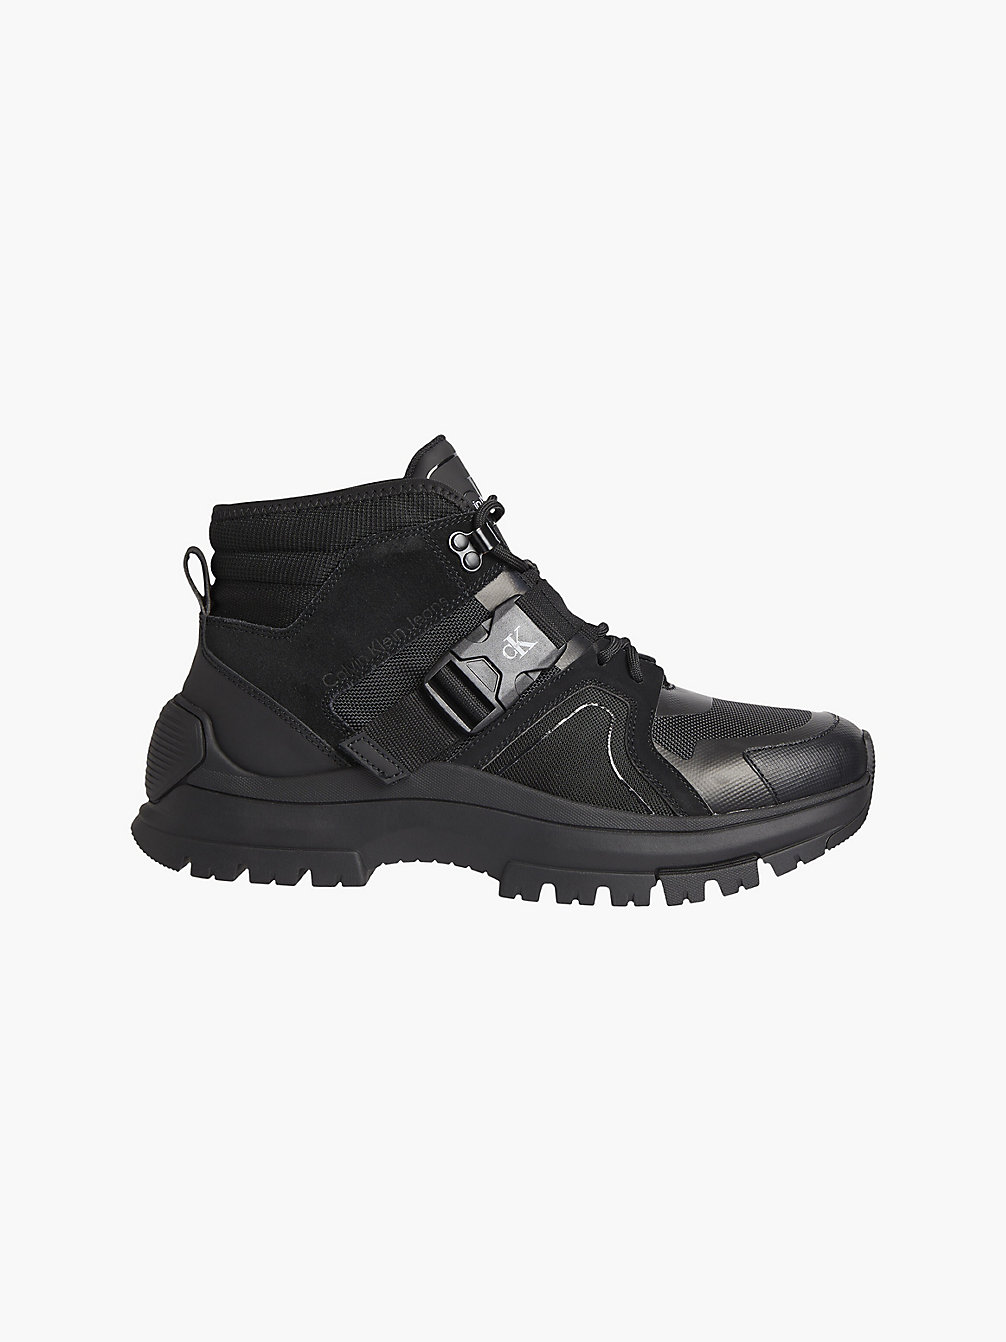 BLACK Recycled Hybrid Hiking Boots undefined men Calvin Klein